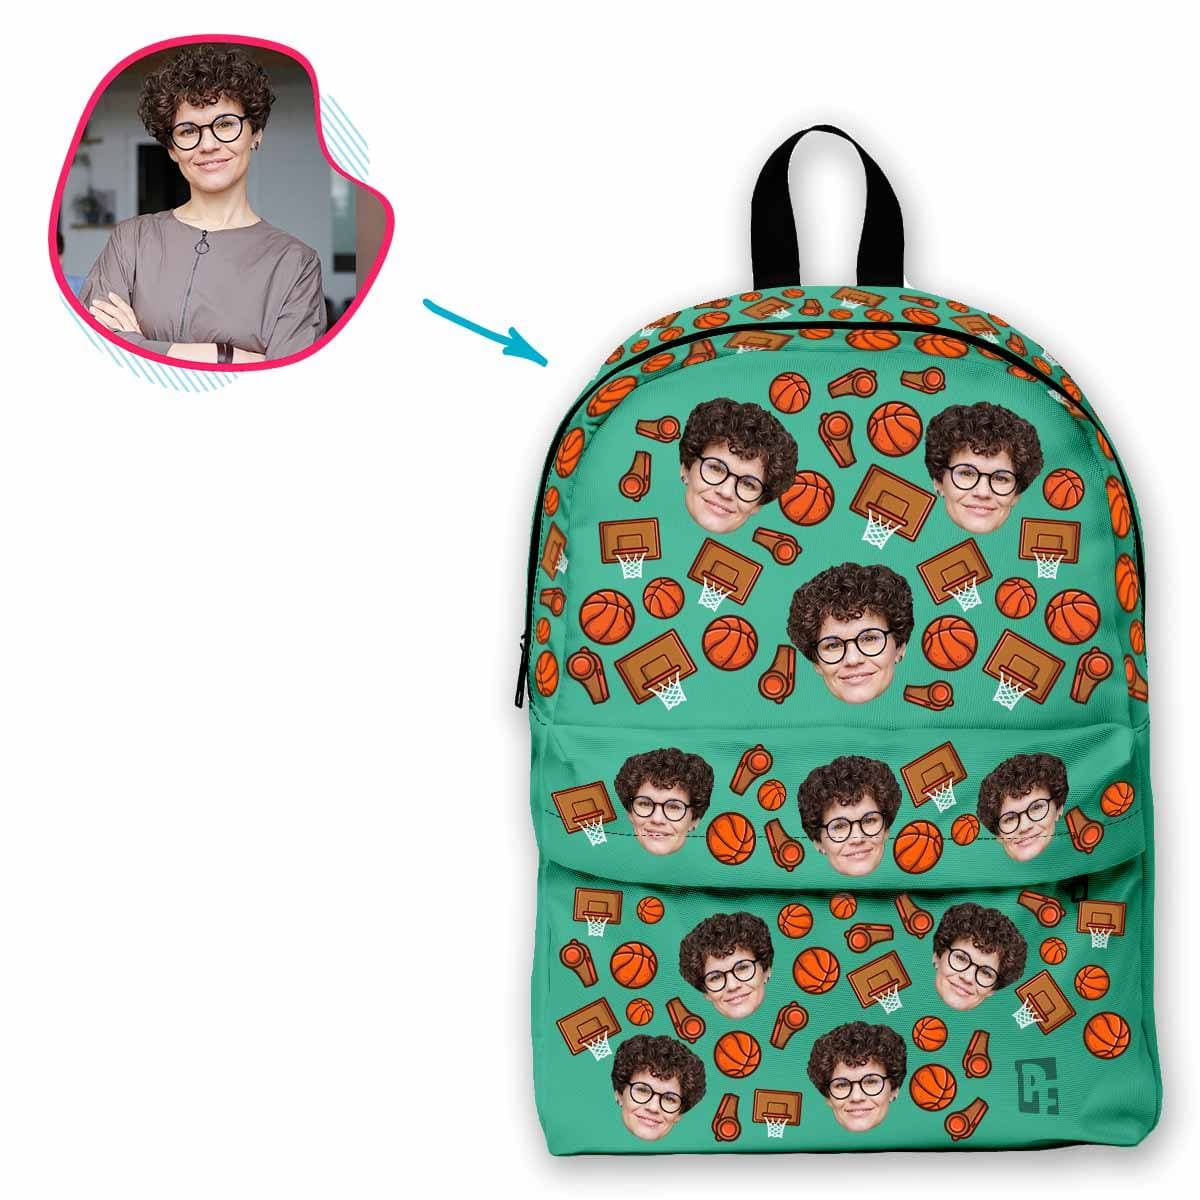 mint Basketball classic backpack personalized with photo of face printed on it